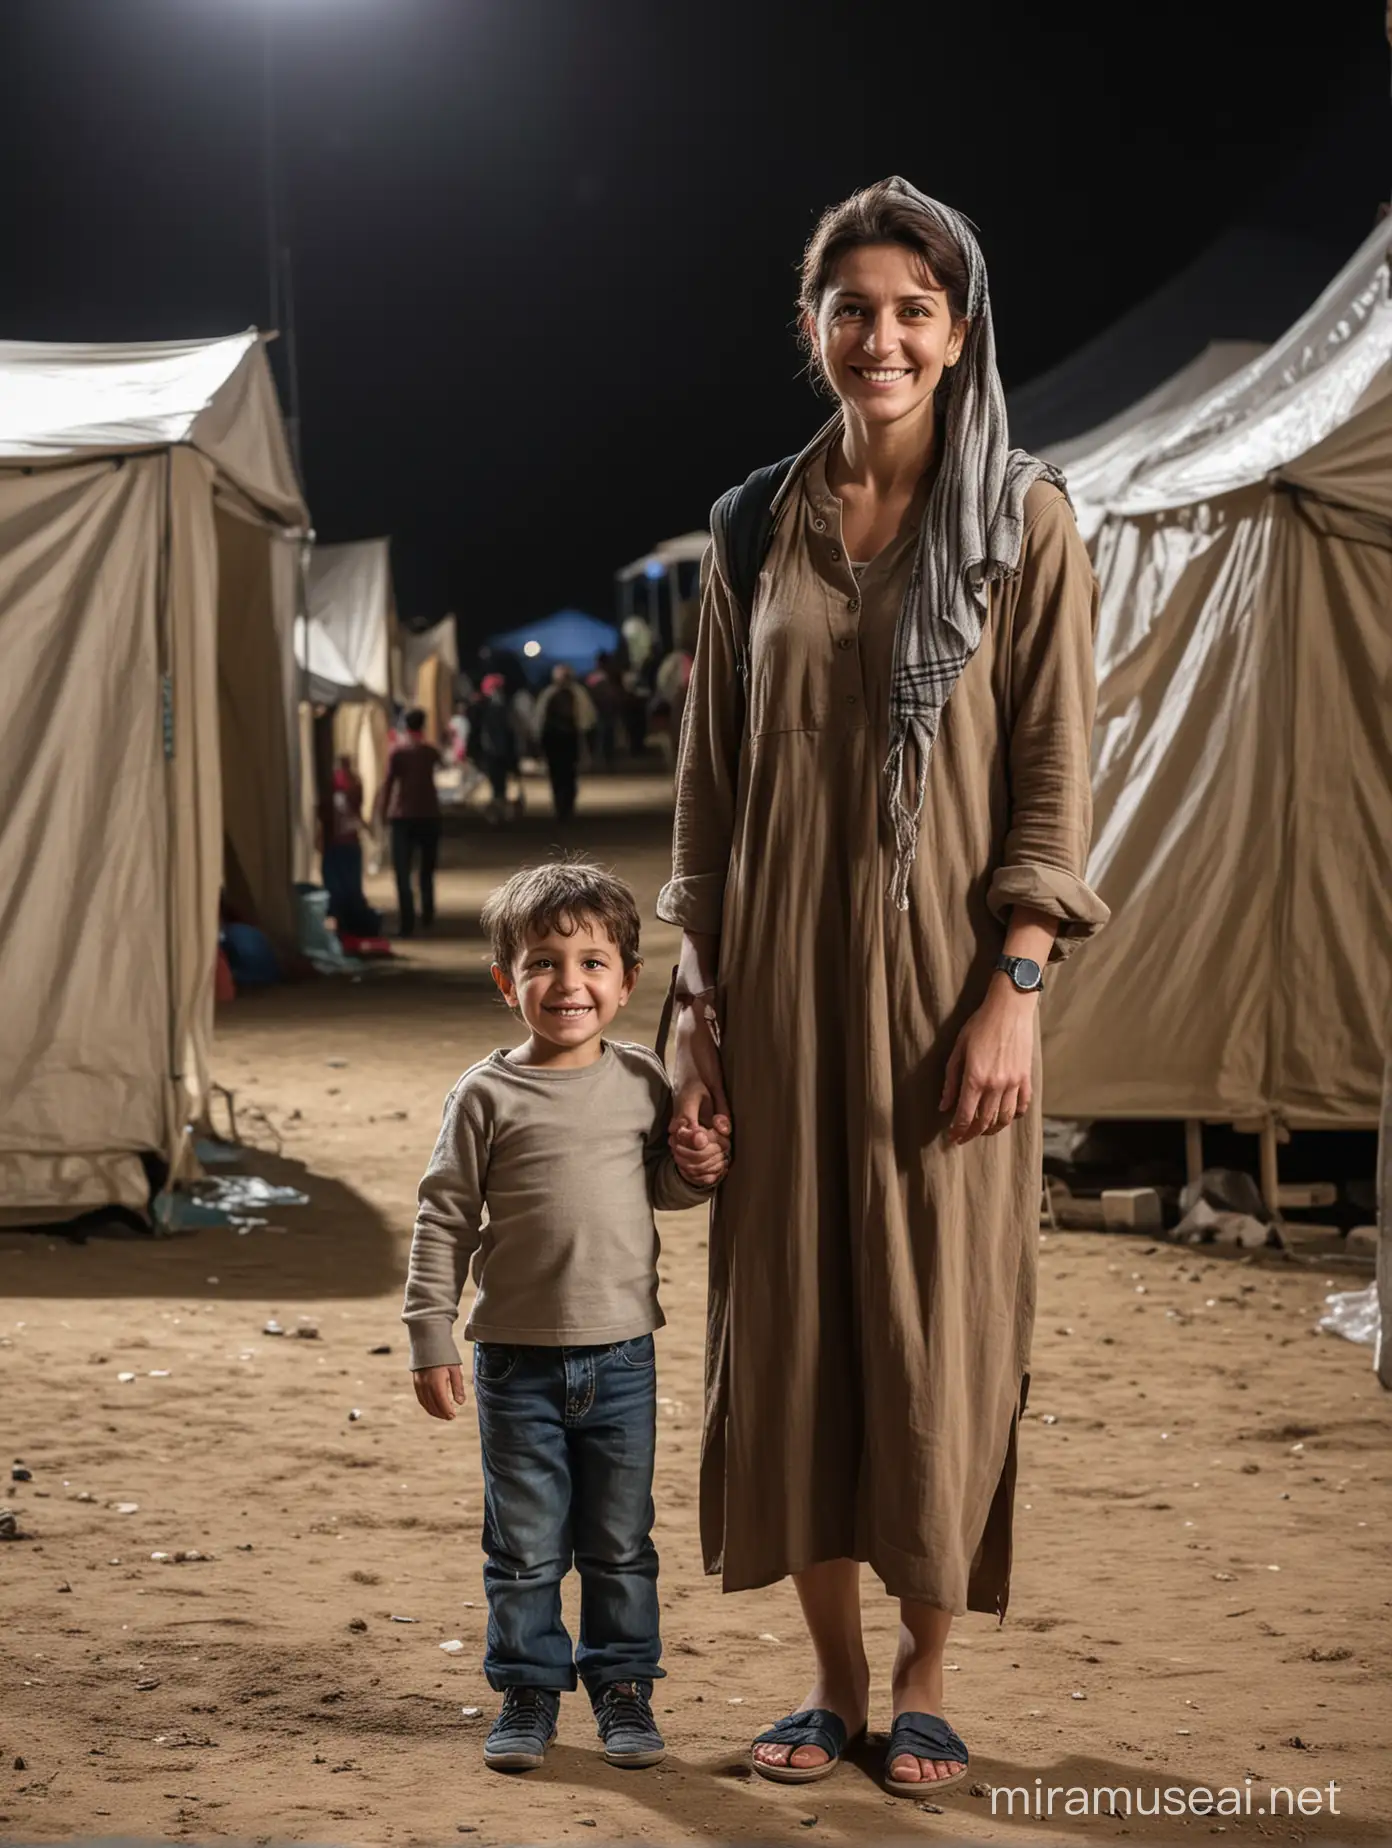 Smiling Woman and Boy on Theater Stage Refugee Camp Scene with Tents